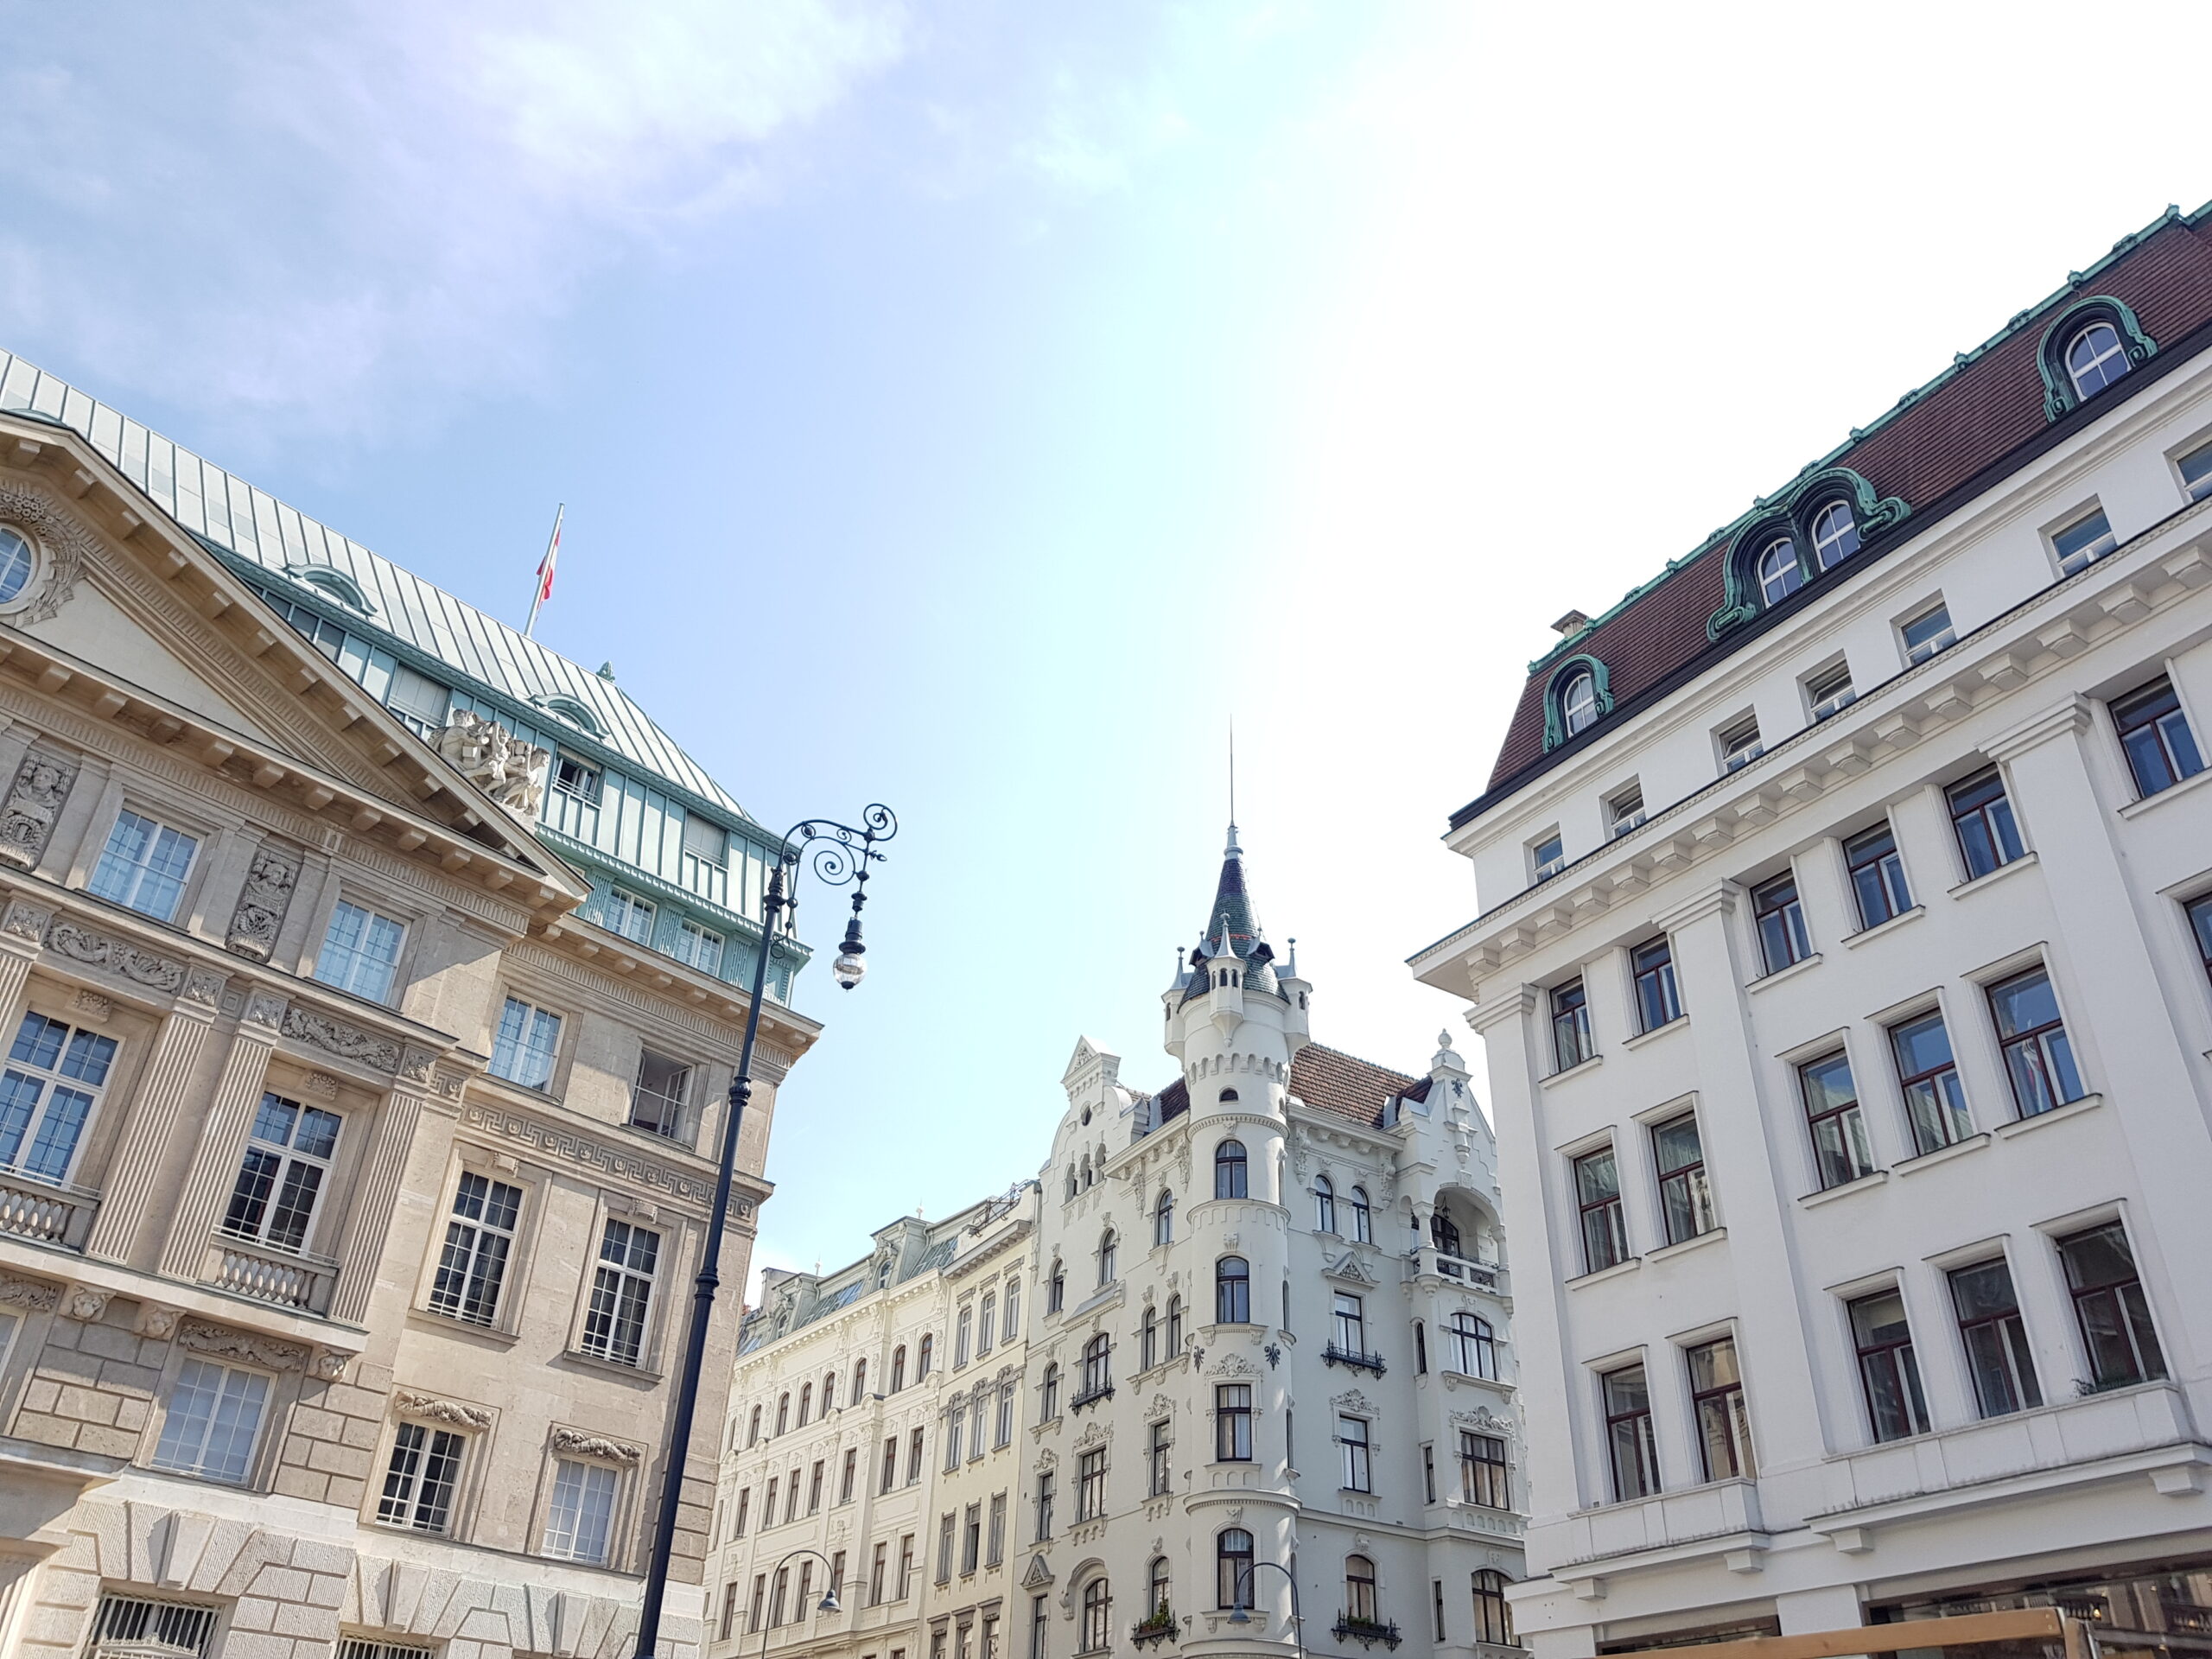 Vienna architectural landscape showcasing ornate facades, Austrian flag, green rooftops, and a turret under a clear sky